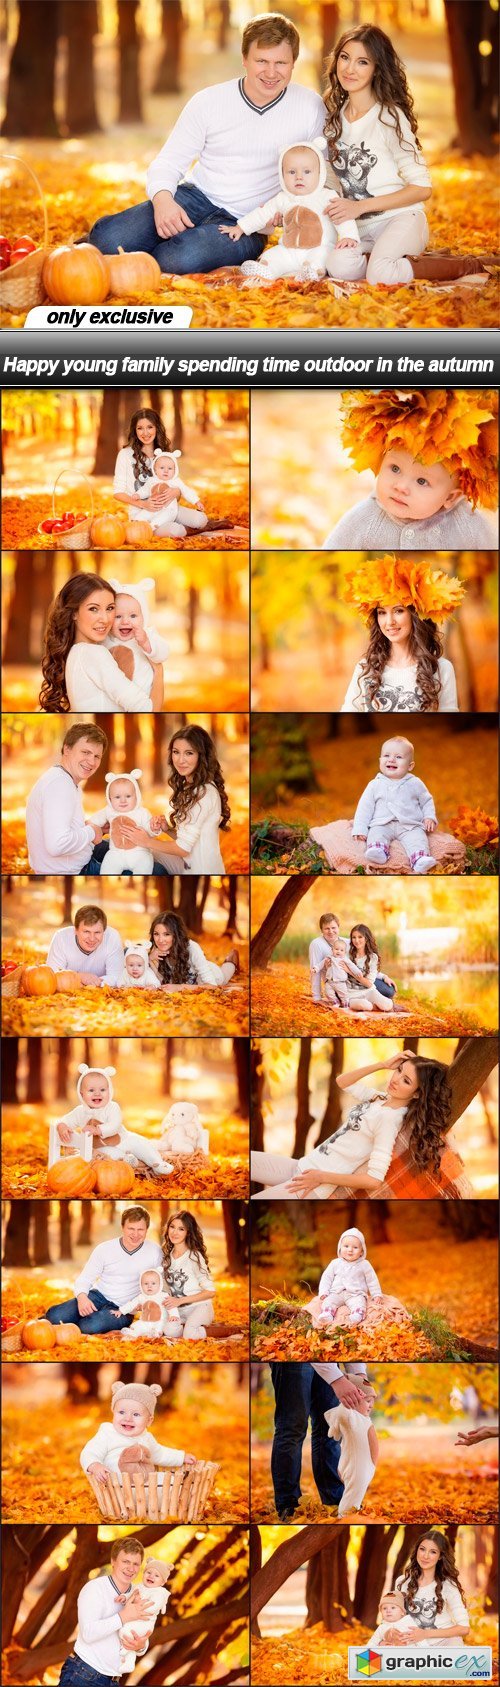 Happy young family spending time outdoor in the autumn - 16 UHQ JPEG